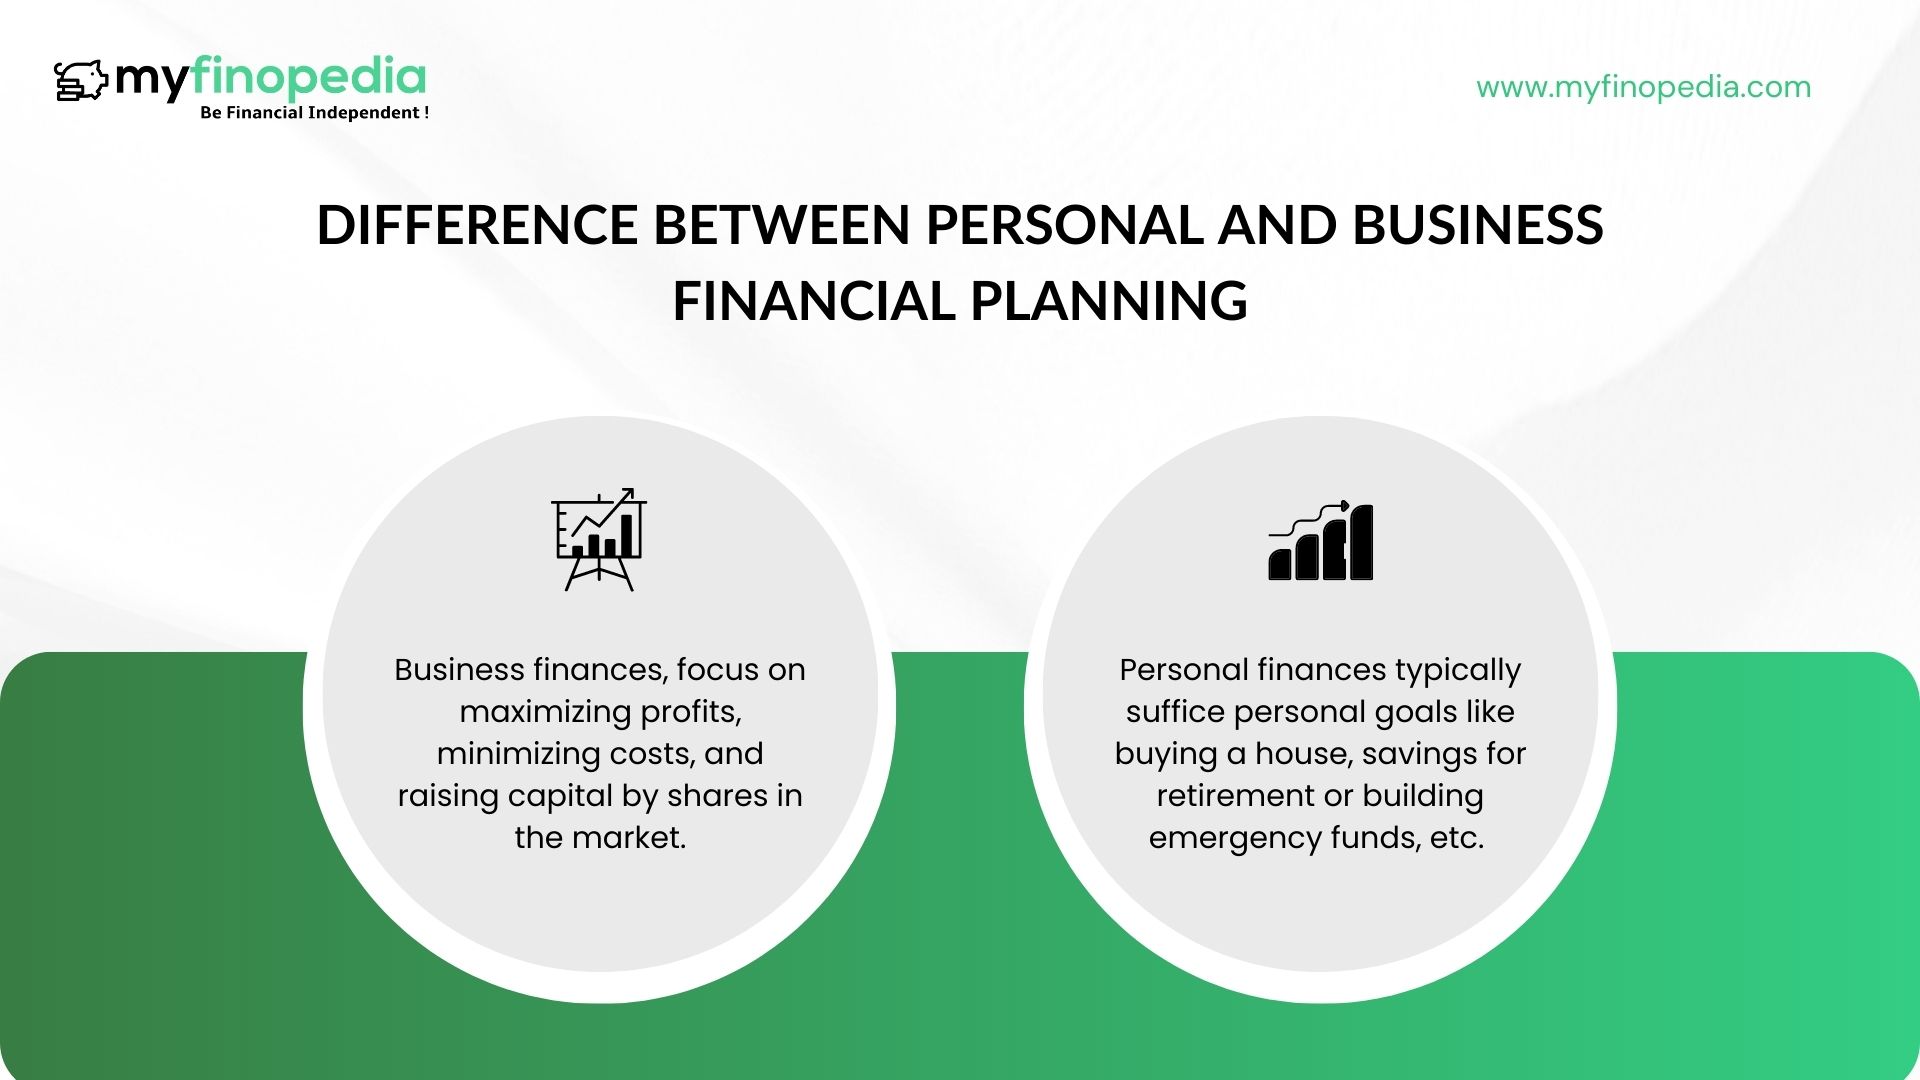 Difference between Personal and Business Financial Planning